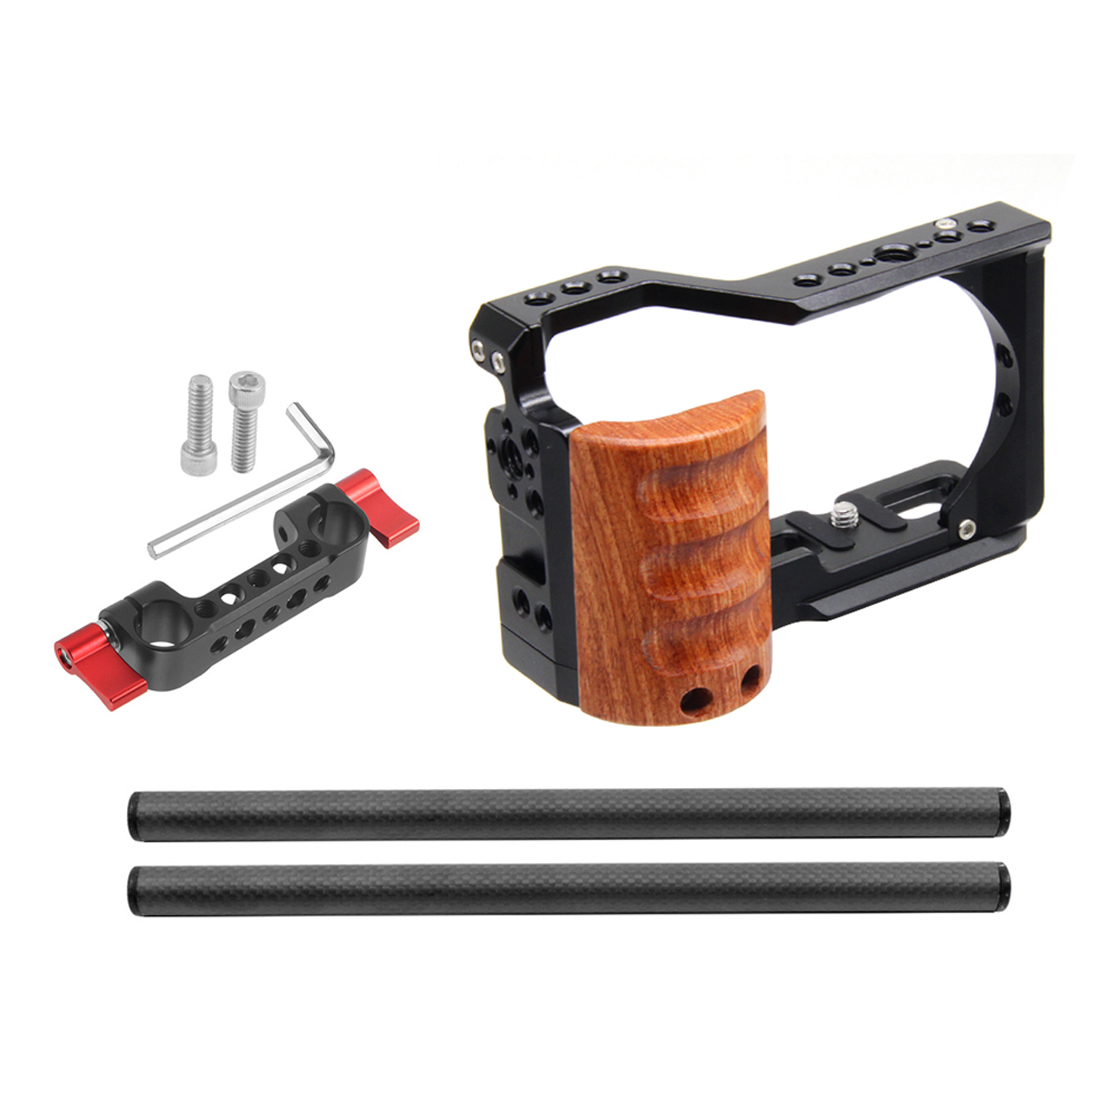 US$ 48.61 - ZVE10 - Camera Cage with Wooden Handle, with Focusing